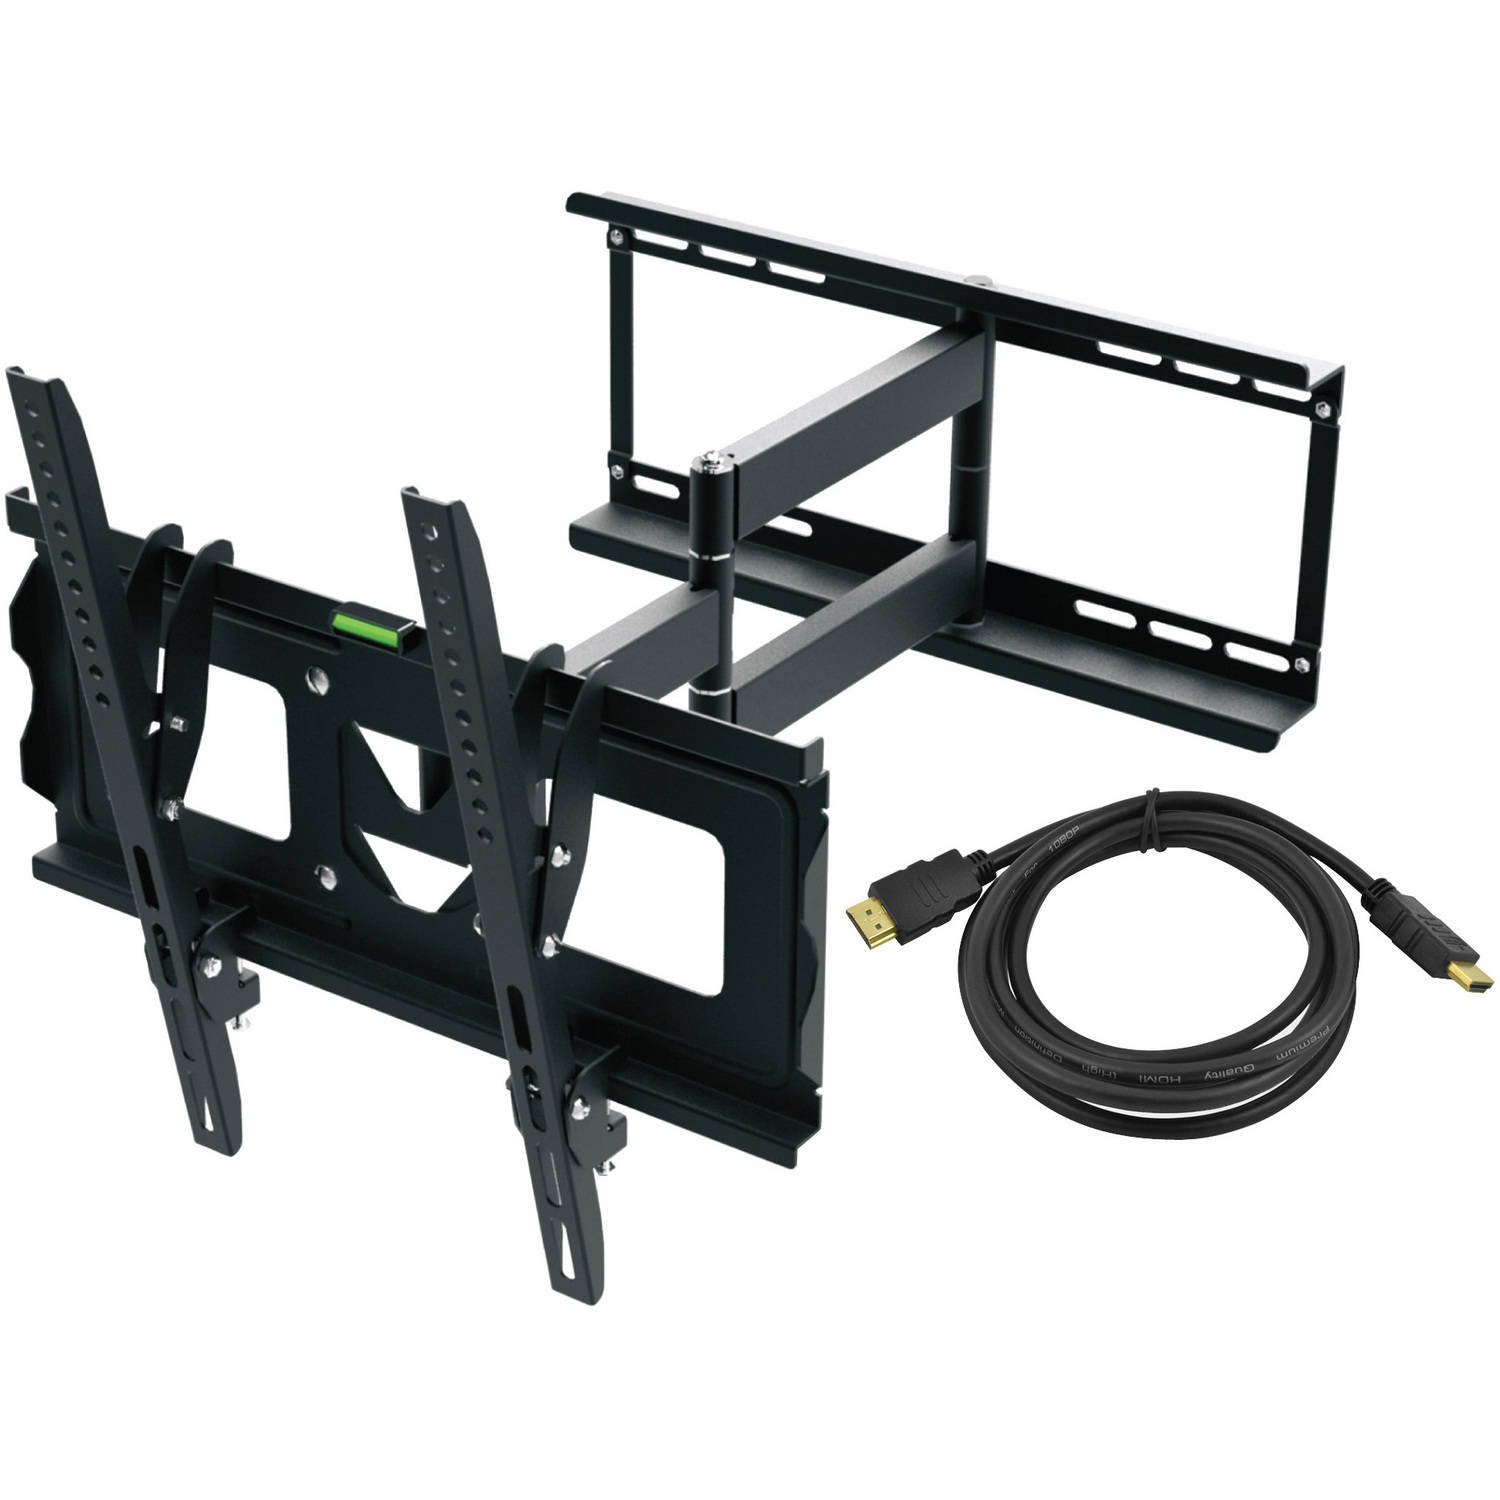 Ematic Full Motion TV Wall Mount Kit with HDMI Cable for 19" - 70" Displays - image 1 of 6